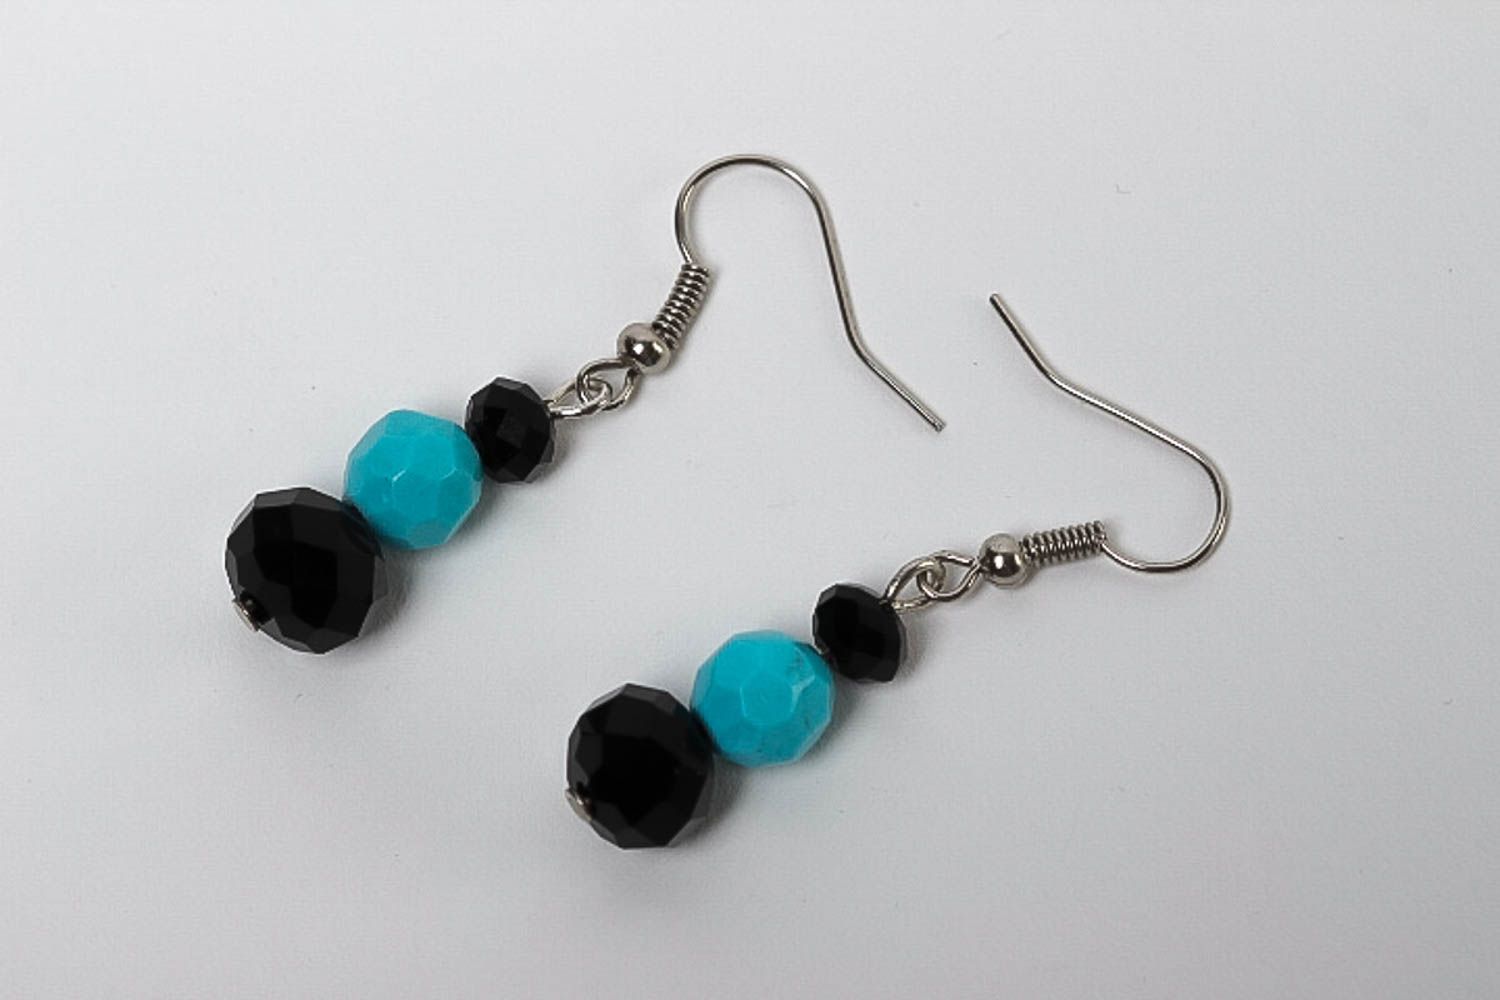 Handmade earrings with turquoise beads earrings with charms designer jewelry photo 2